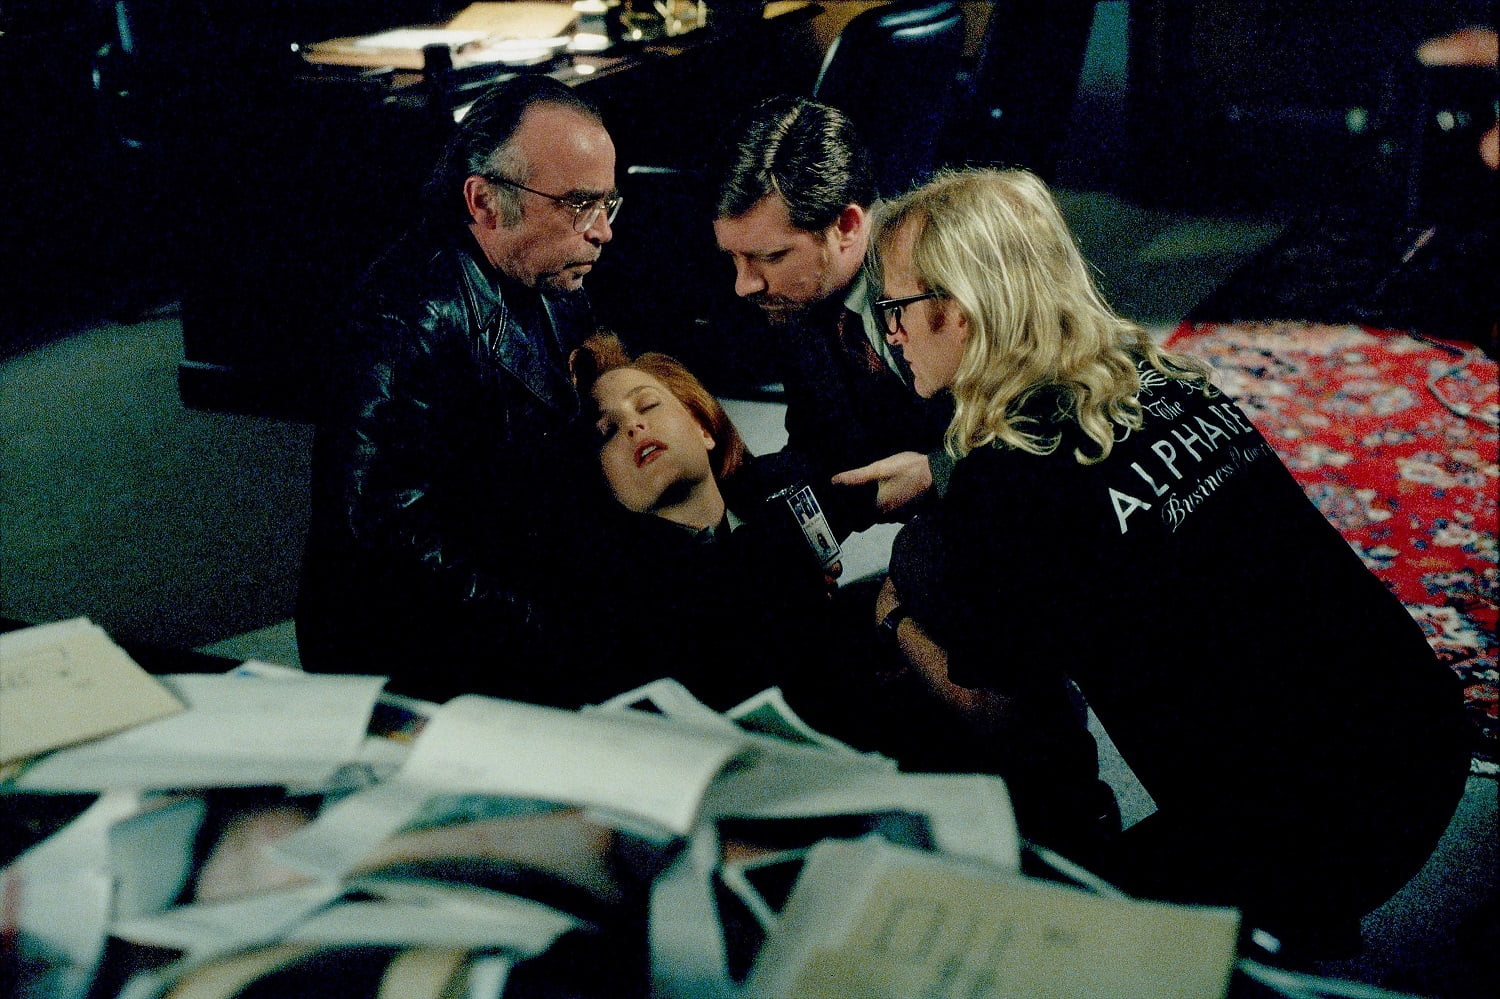 ‘The X-Files’ Spinoff Predicted 9/11 Six Months Before Tragedy